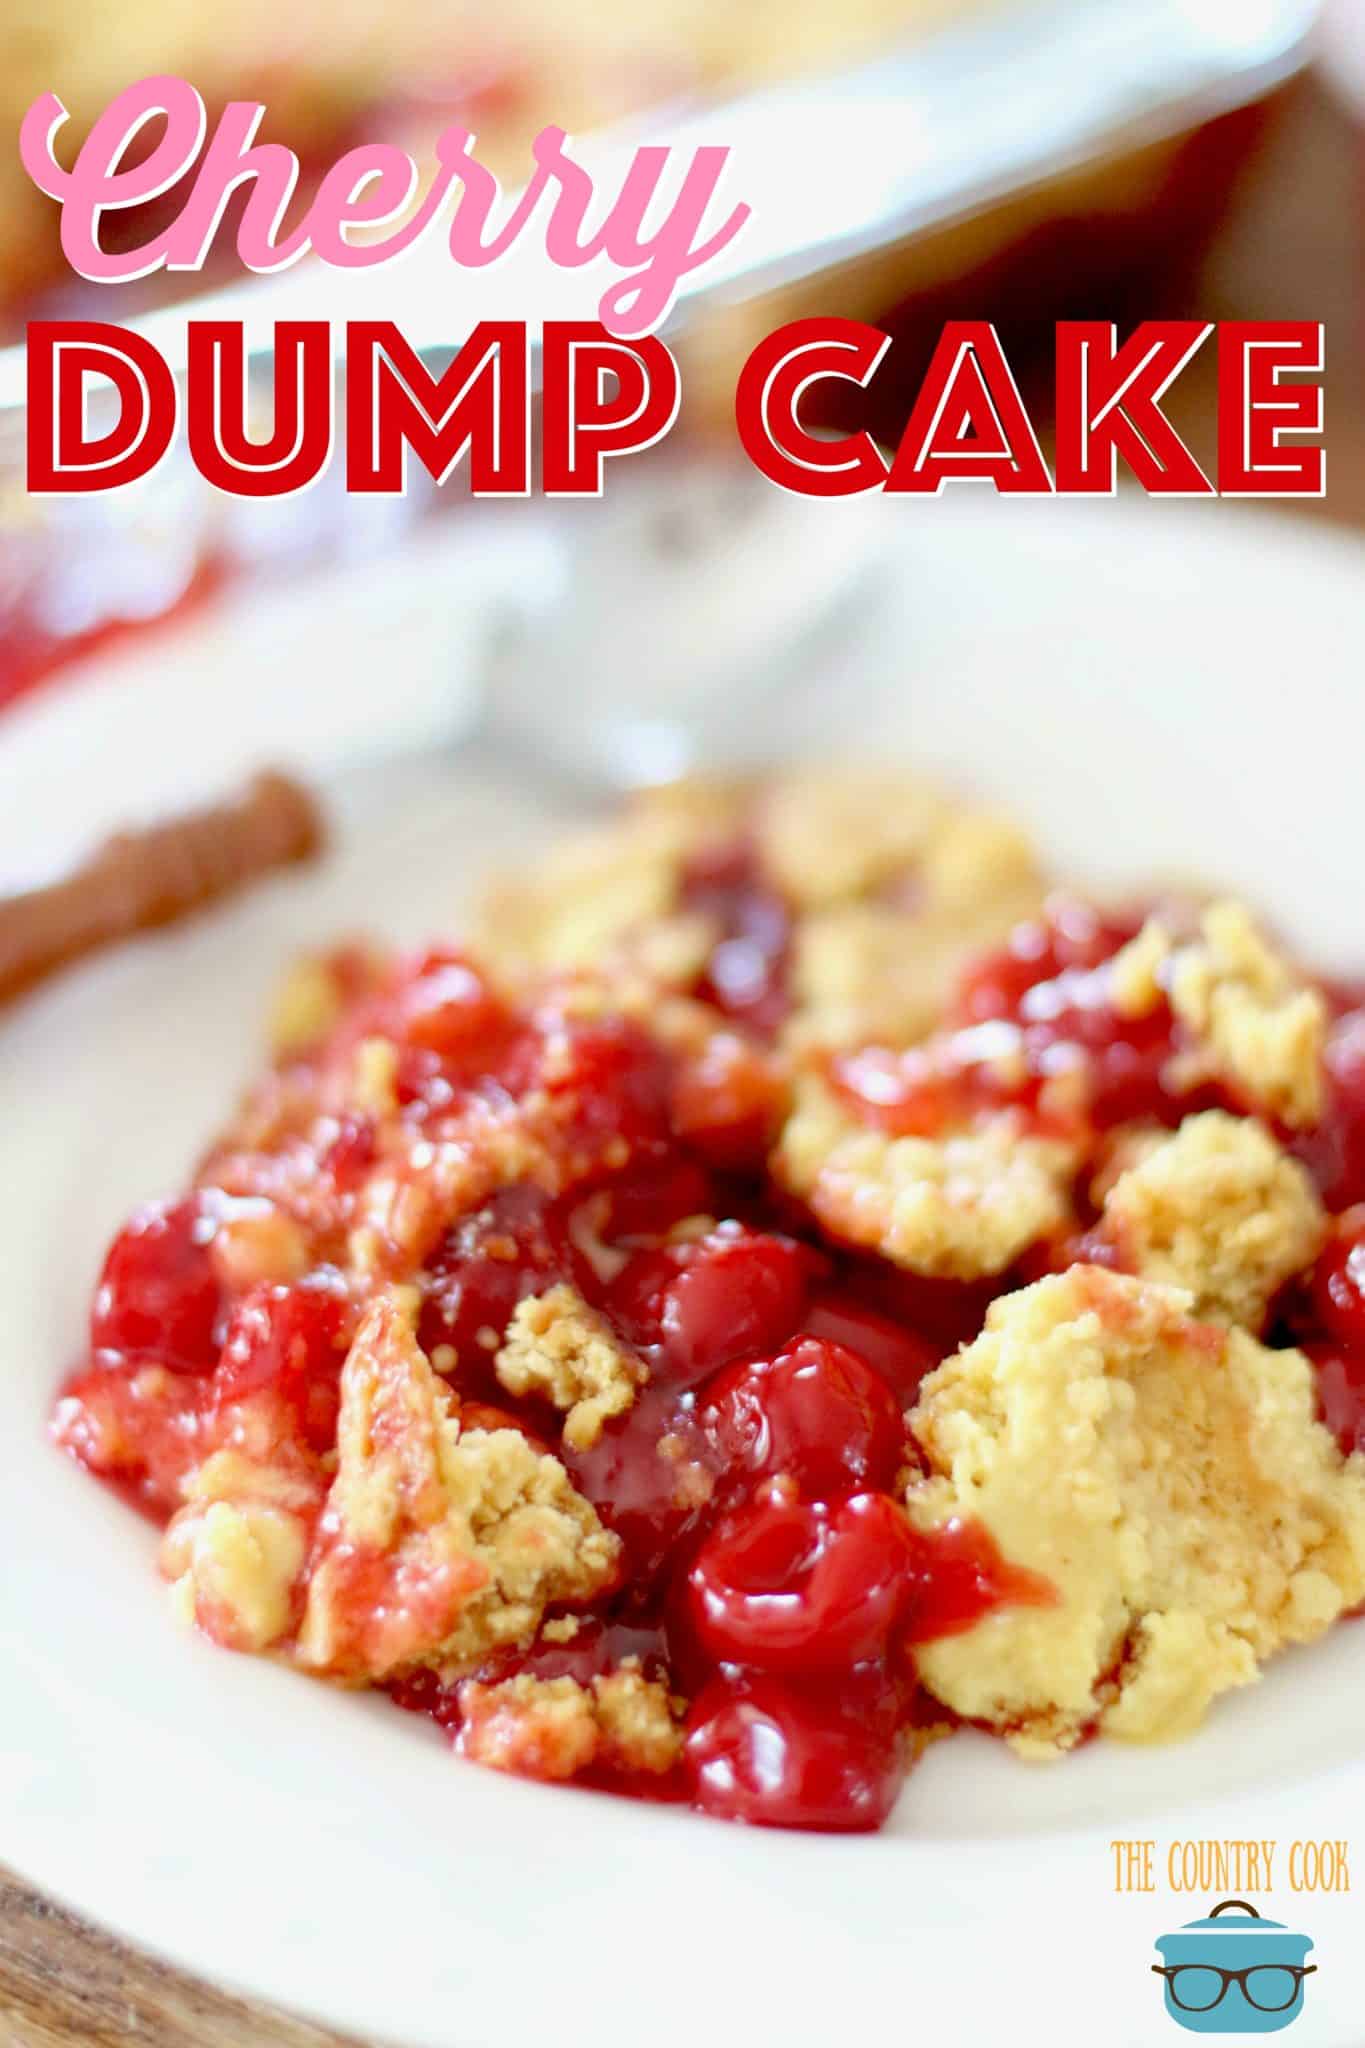 Easy Cherry Dump Cake recipe from The Country Cook, serving of cherry dump cake shown in a white bowl